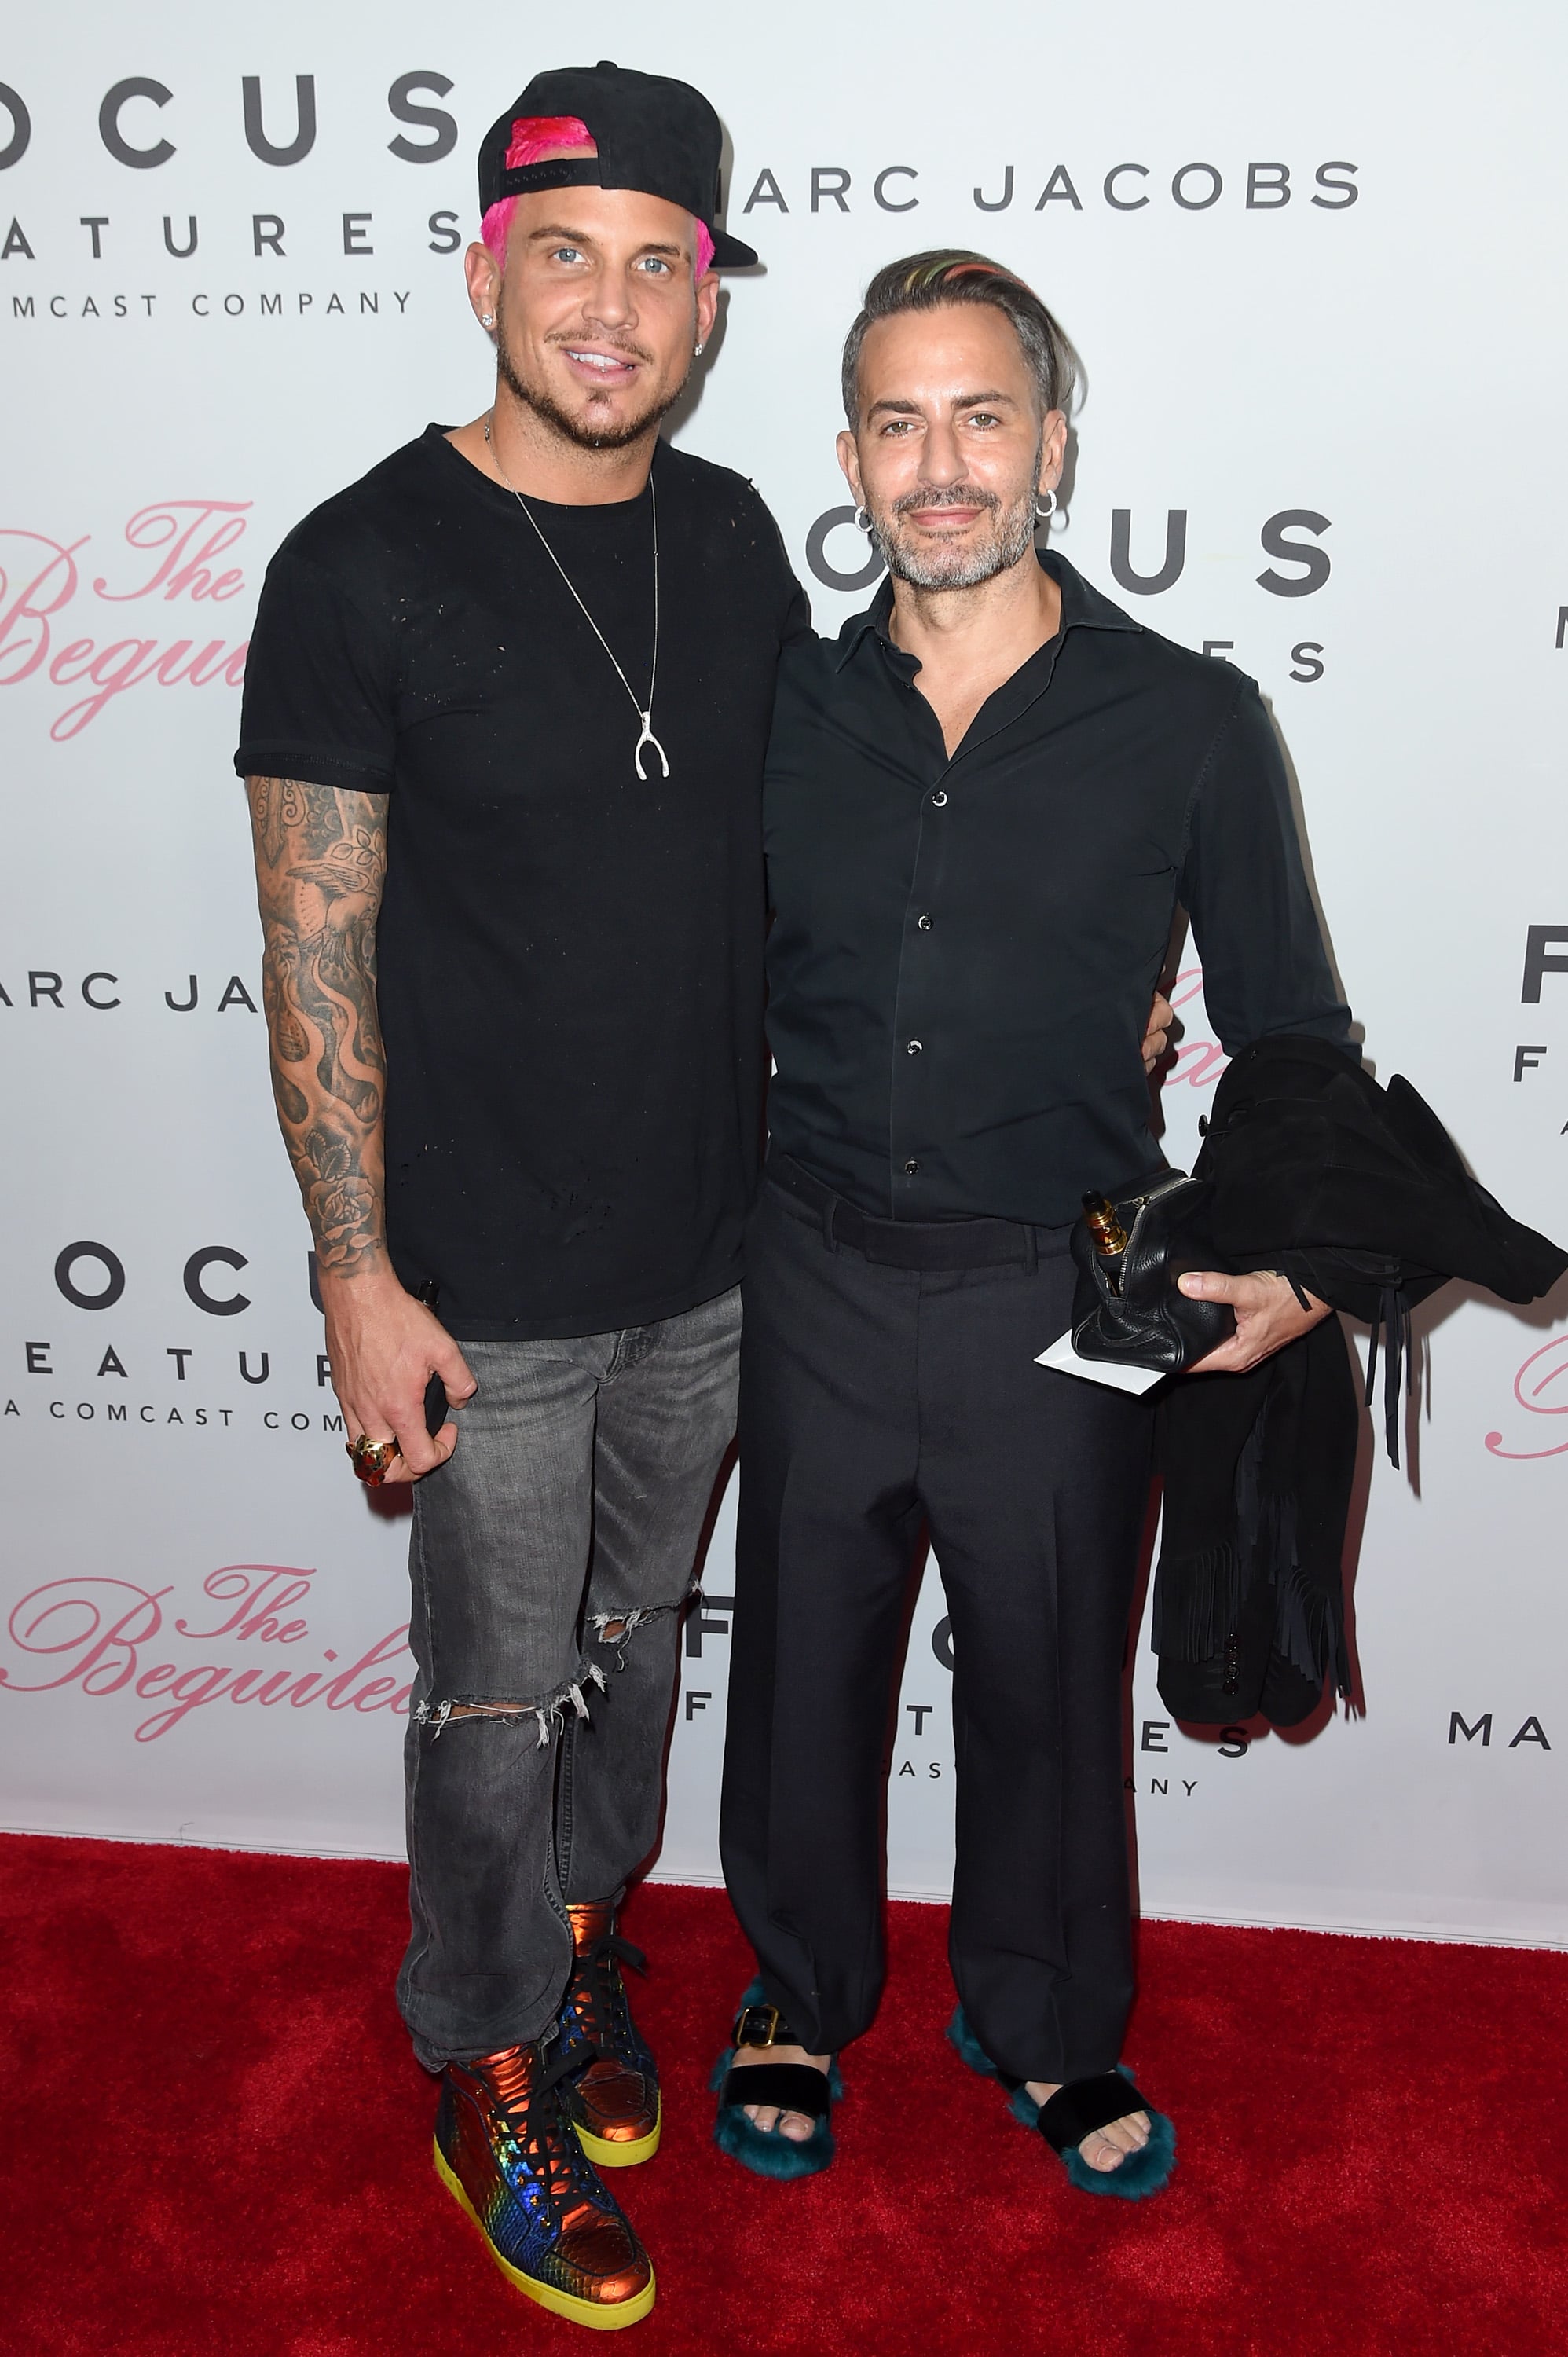 Marc Jacobs Marries Charly Defrancesco in New York City: Pics